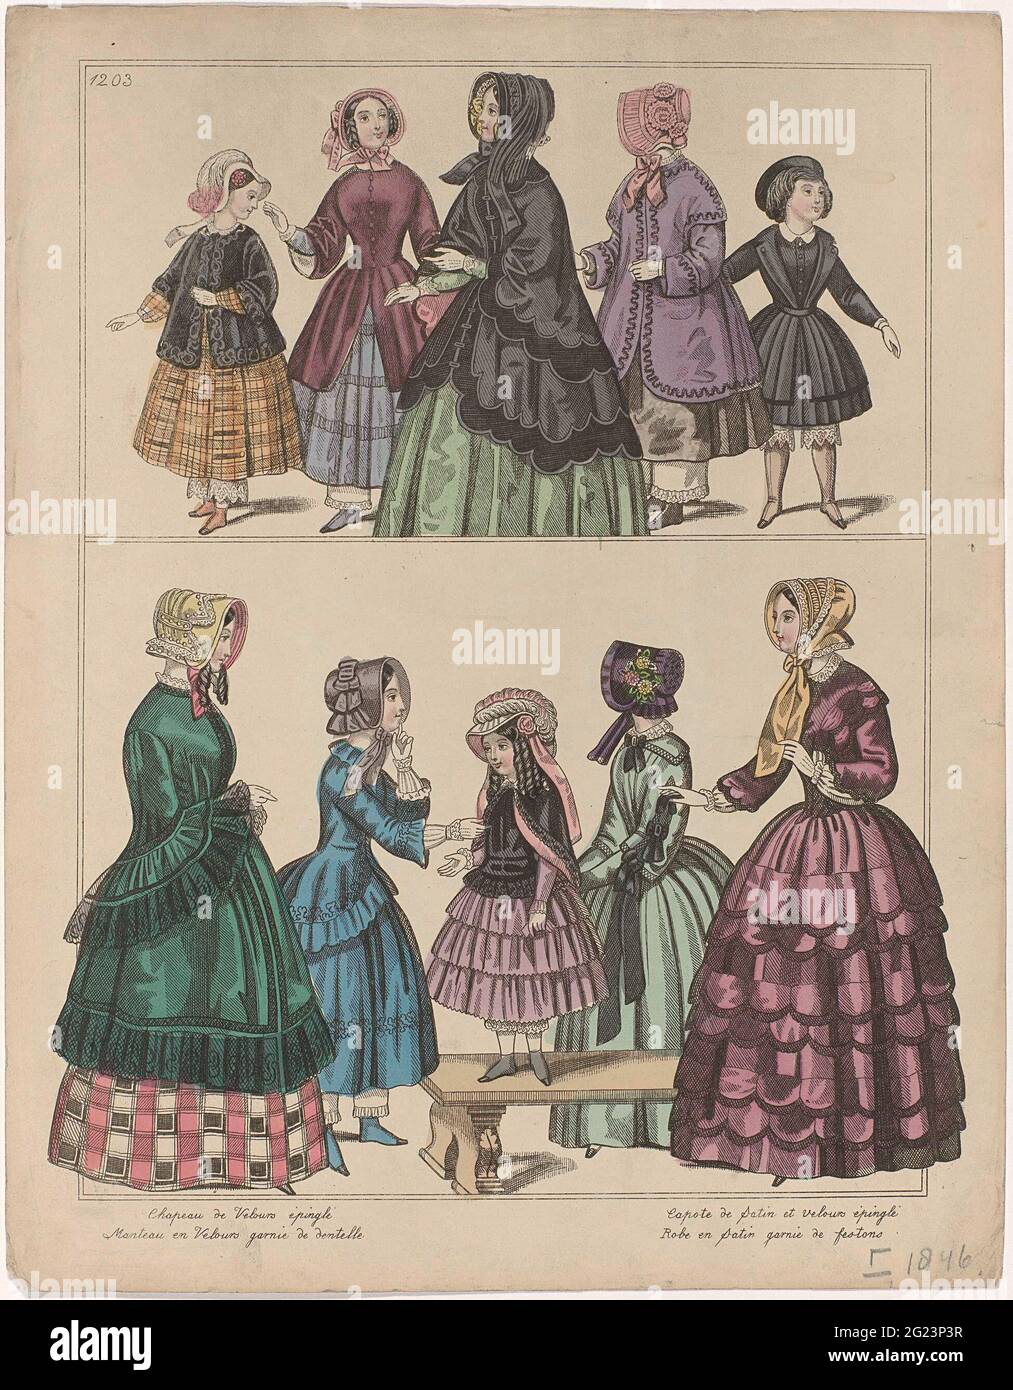 Townsend's Monthly Selection or Parisian Costumes, 1846, No. 1203: Chapeau  de Velours (...). In the upper frame four girls with 'Bloomers' and a woman  with cloak. In the lower frame a woman